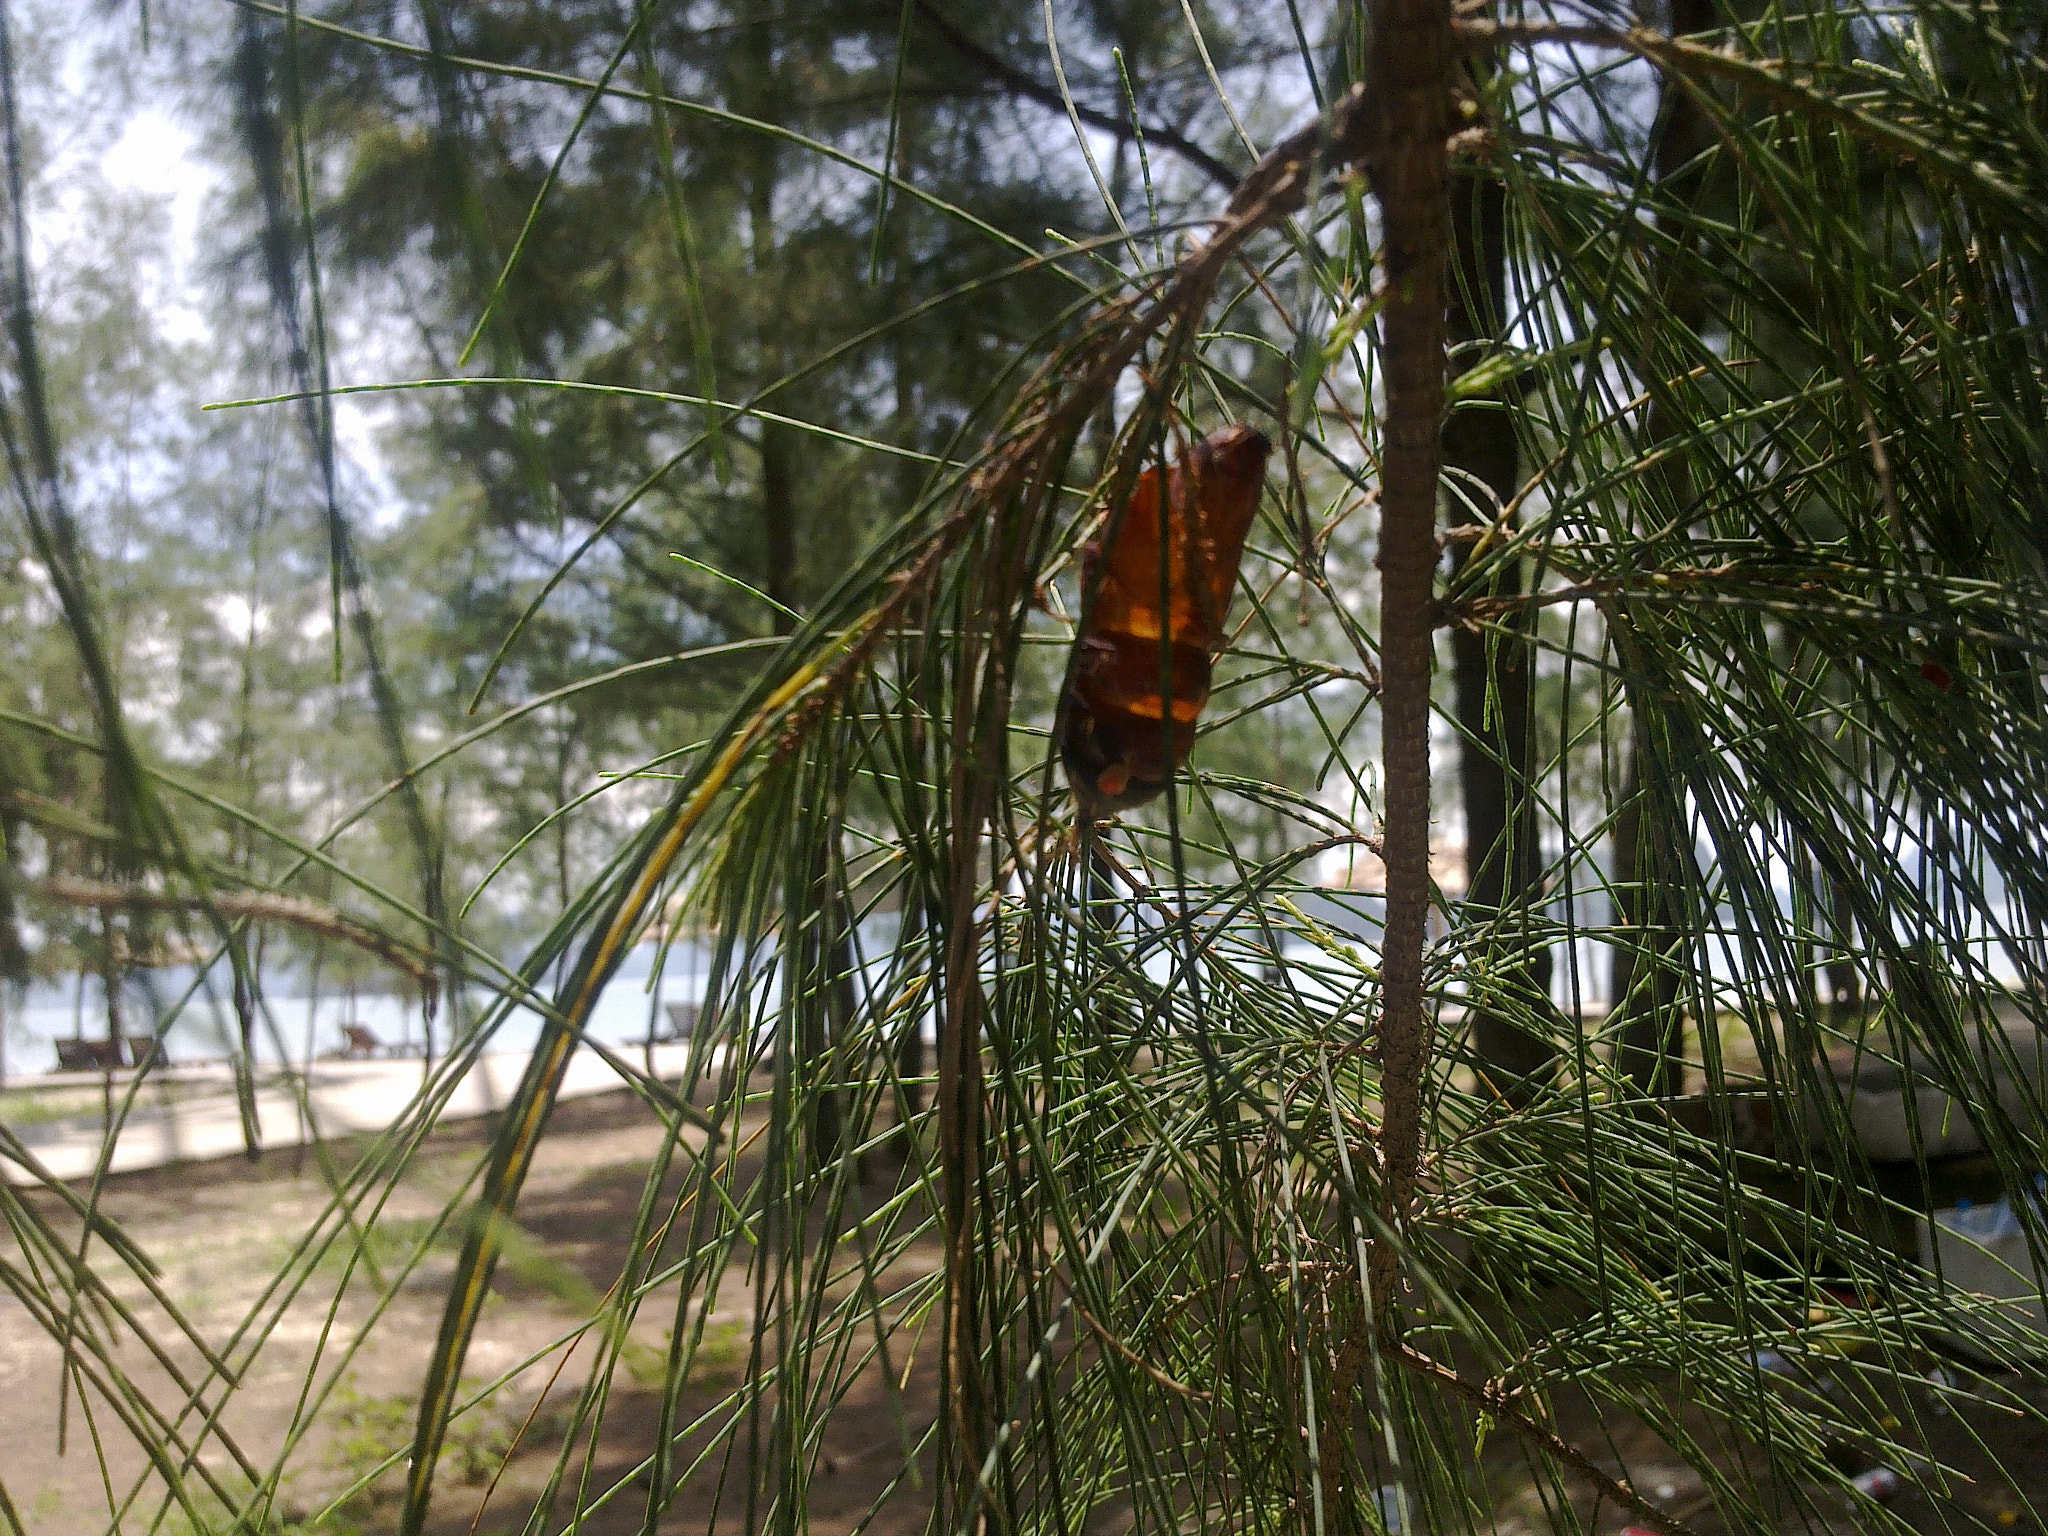 Nokia 6700s sample photo. A little cicada is going to say "hi" to the world photography